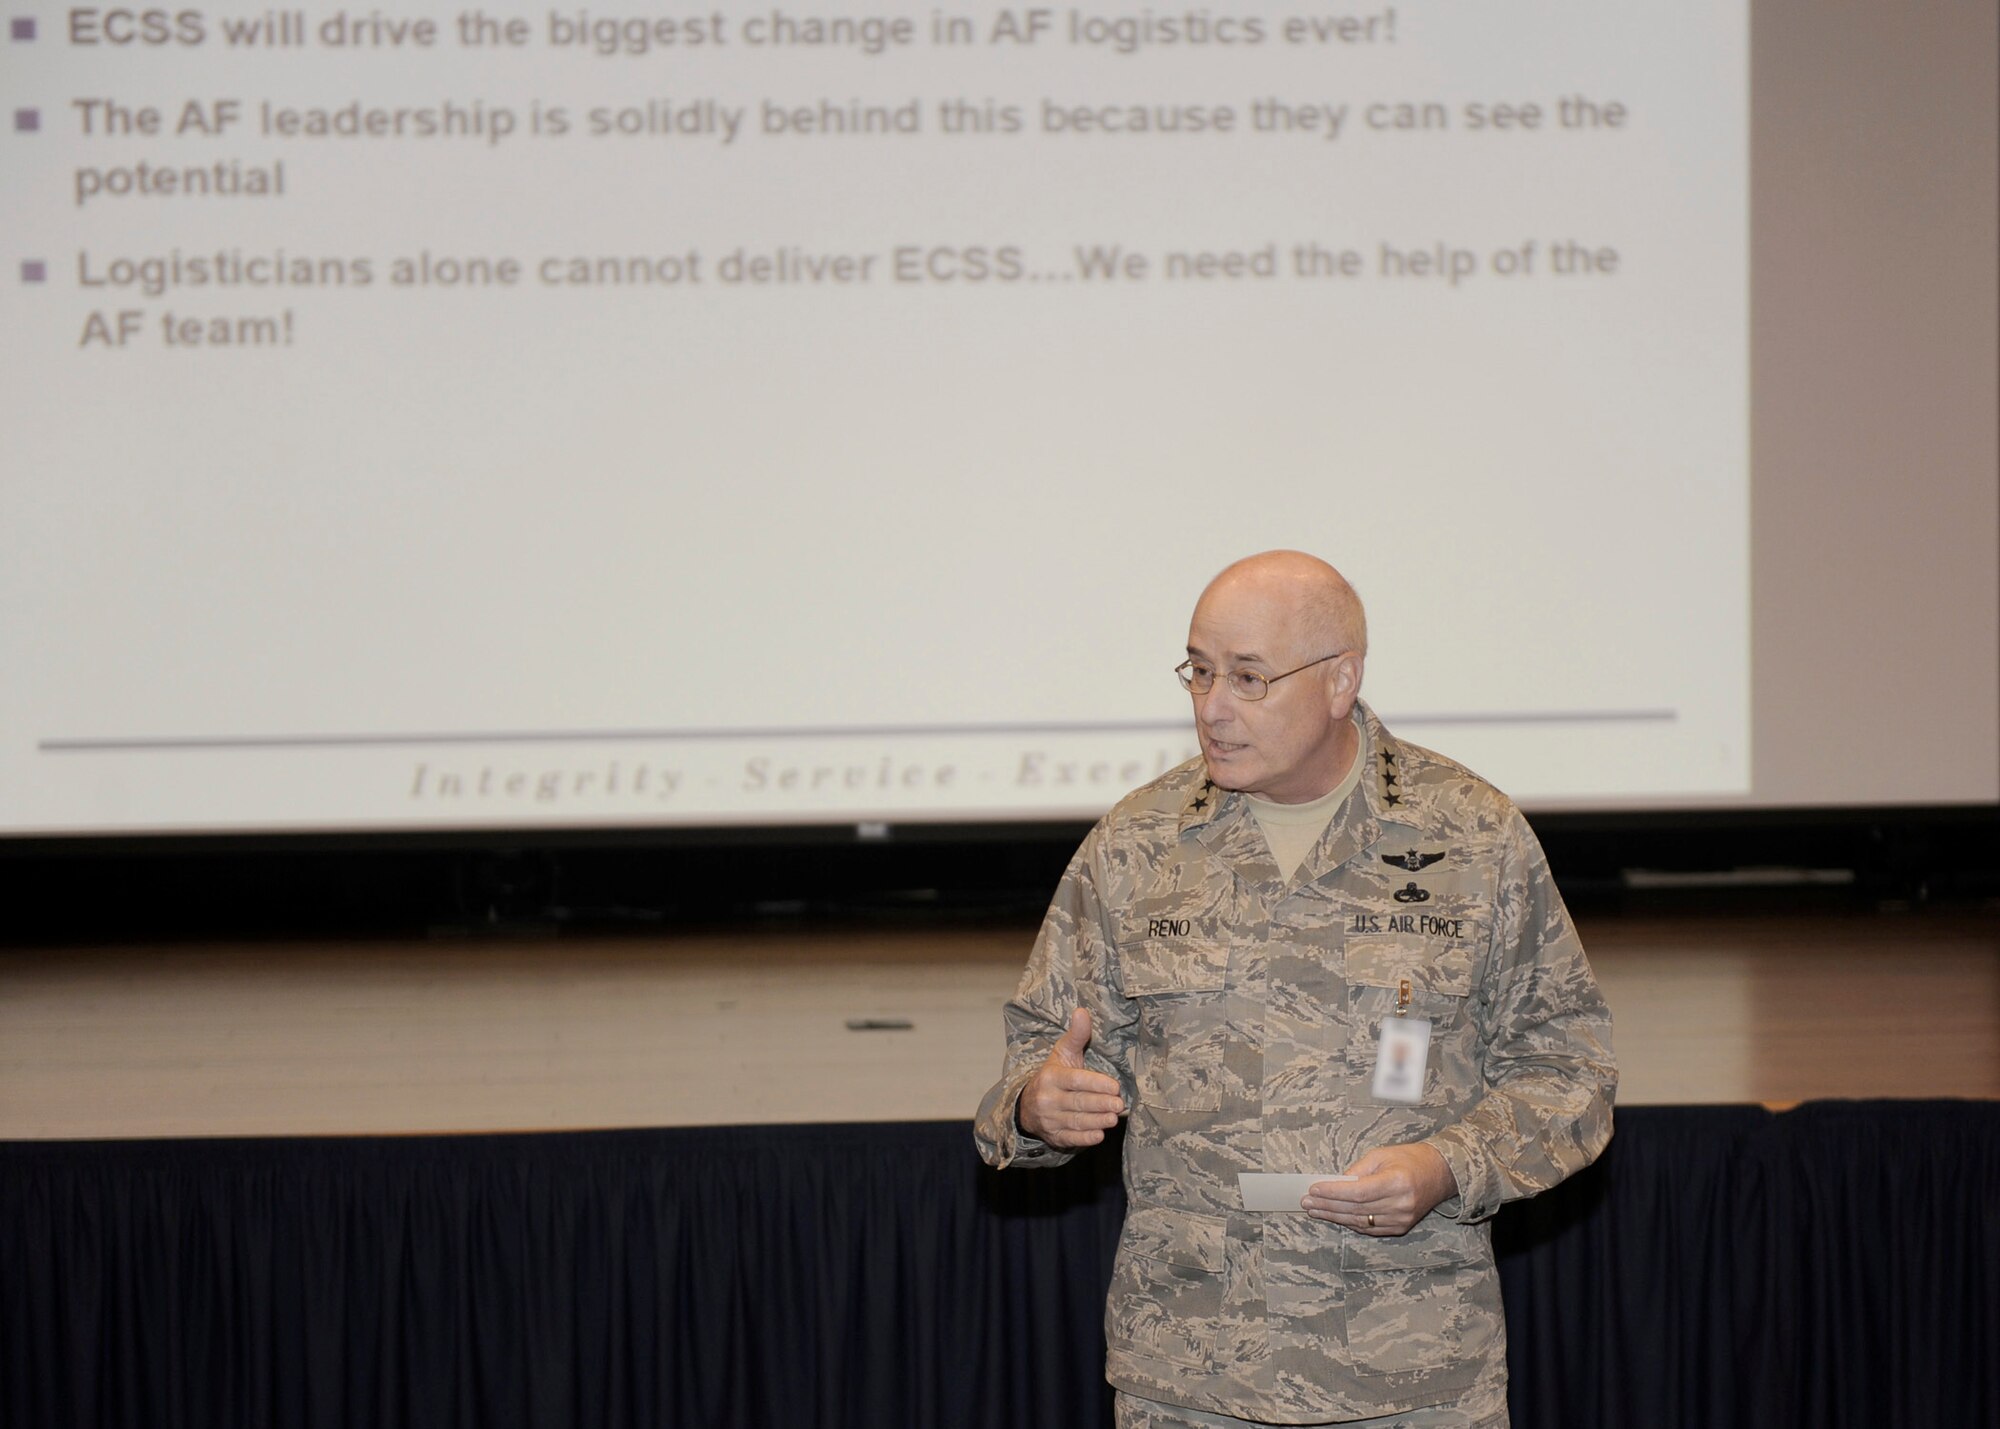 Lt. Gen. Loren Reno, deputy chief of staff for logistics, installations and mission support, discusses the benefits of the Expeditionary Combat Support System to a group of senior Air Force leaders at the Pentagon Oct. 22, 2010. ECSS is an Air Force Logistics transformation that will provide integrated software, standardized business processes, and transformed personnel roles. (U.S. Air Force photo/John Meade)